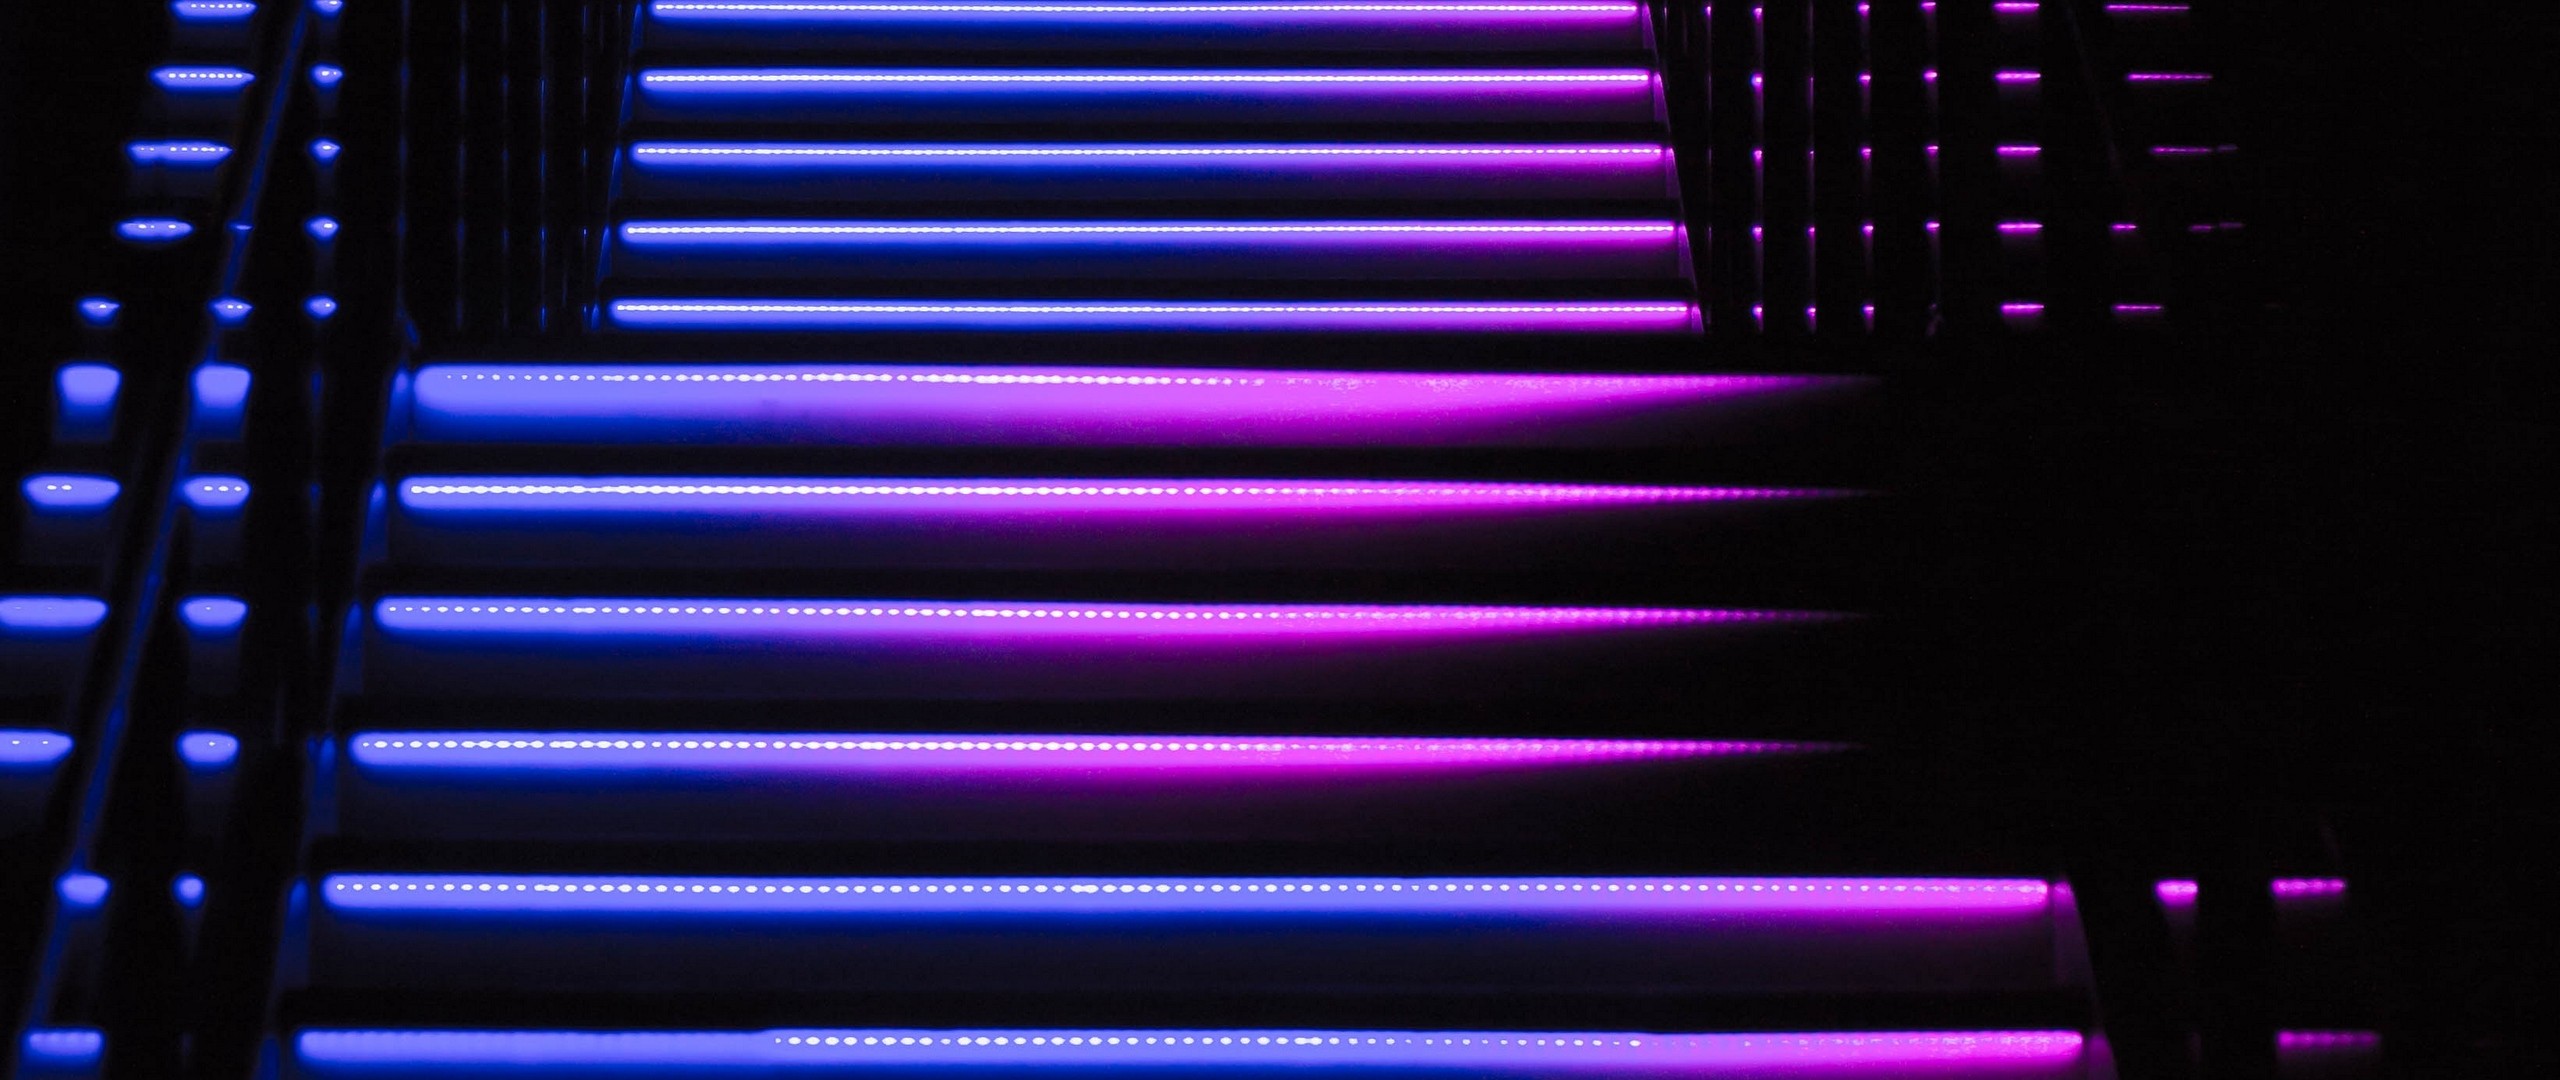 Stairs in purple and blue illunination